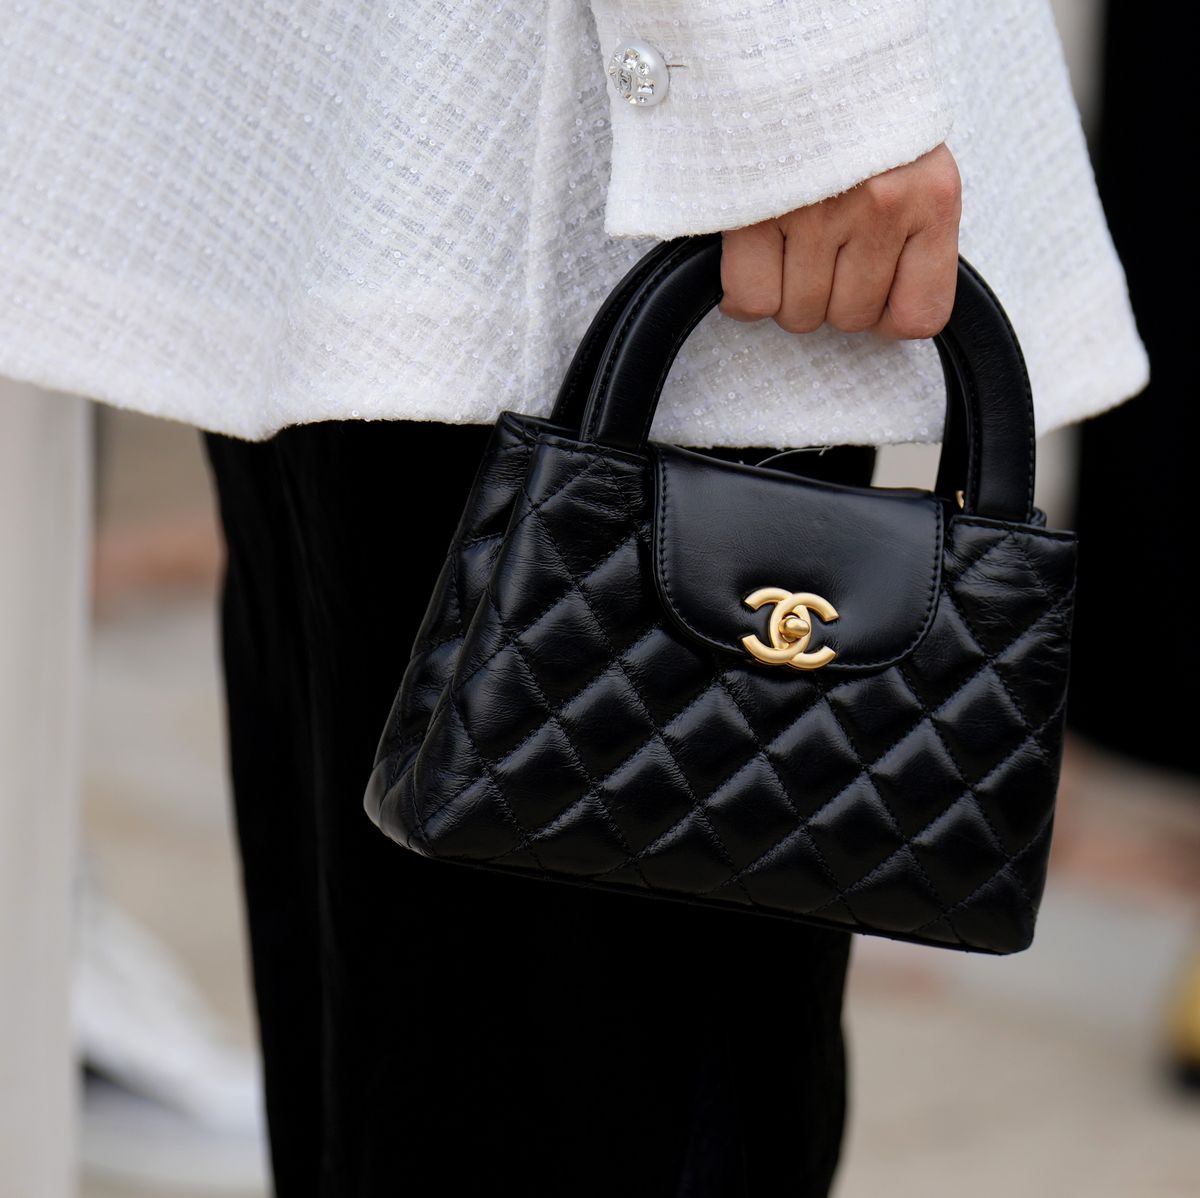 Vintage Chanel from the sustainable luxury webshop Still in Fashion